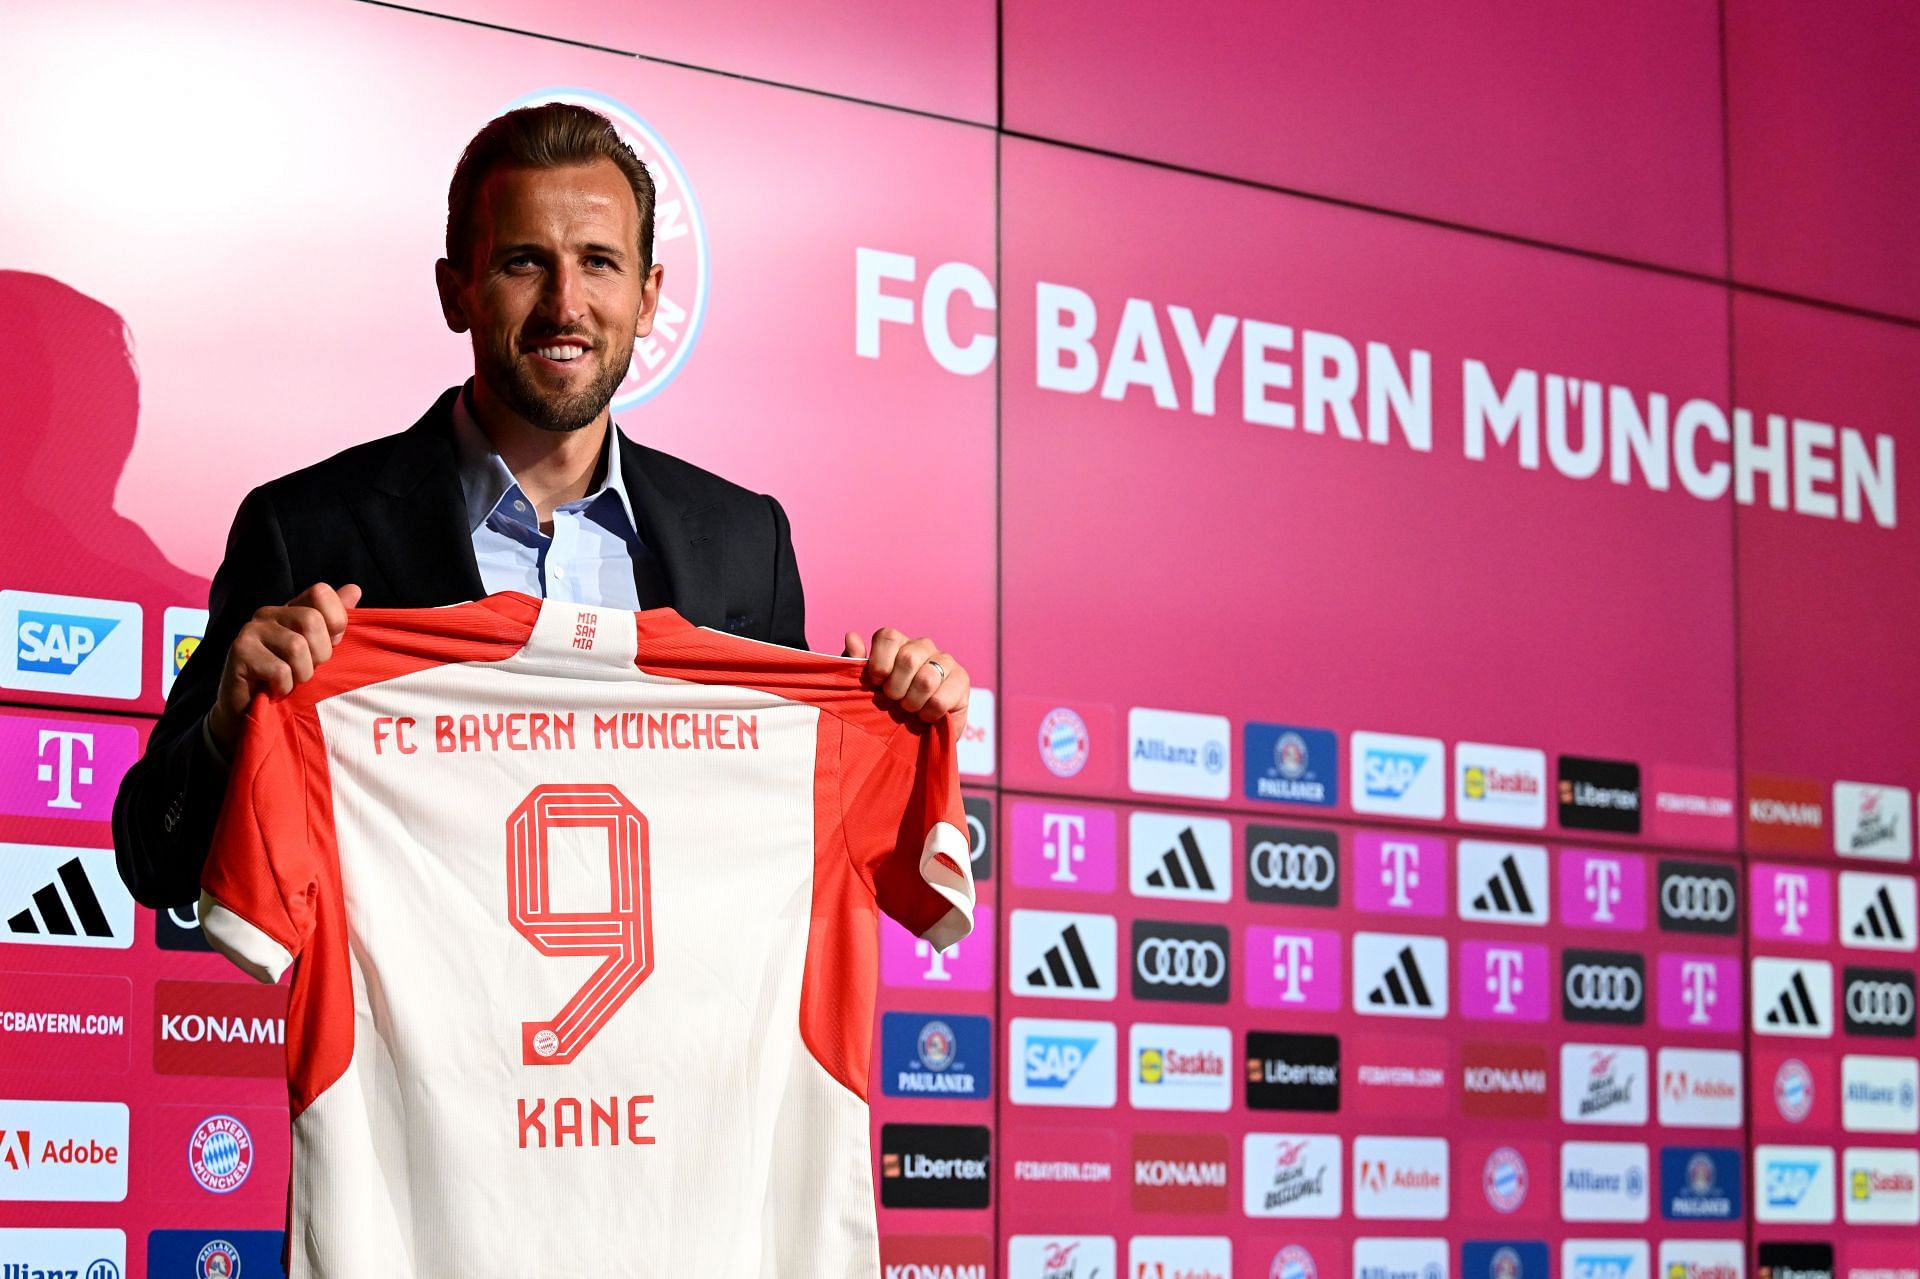 Kane has big aspirations that could be aided by his Bayern transfer.